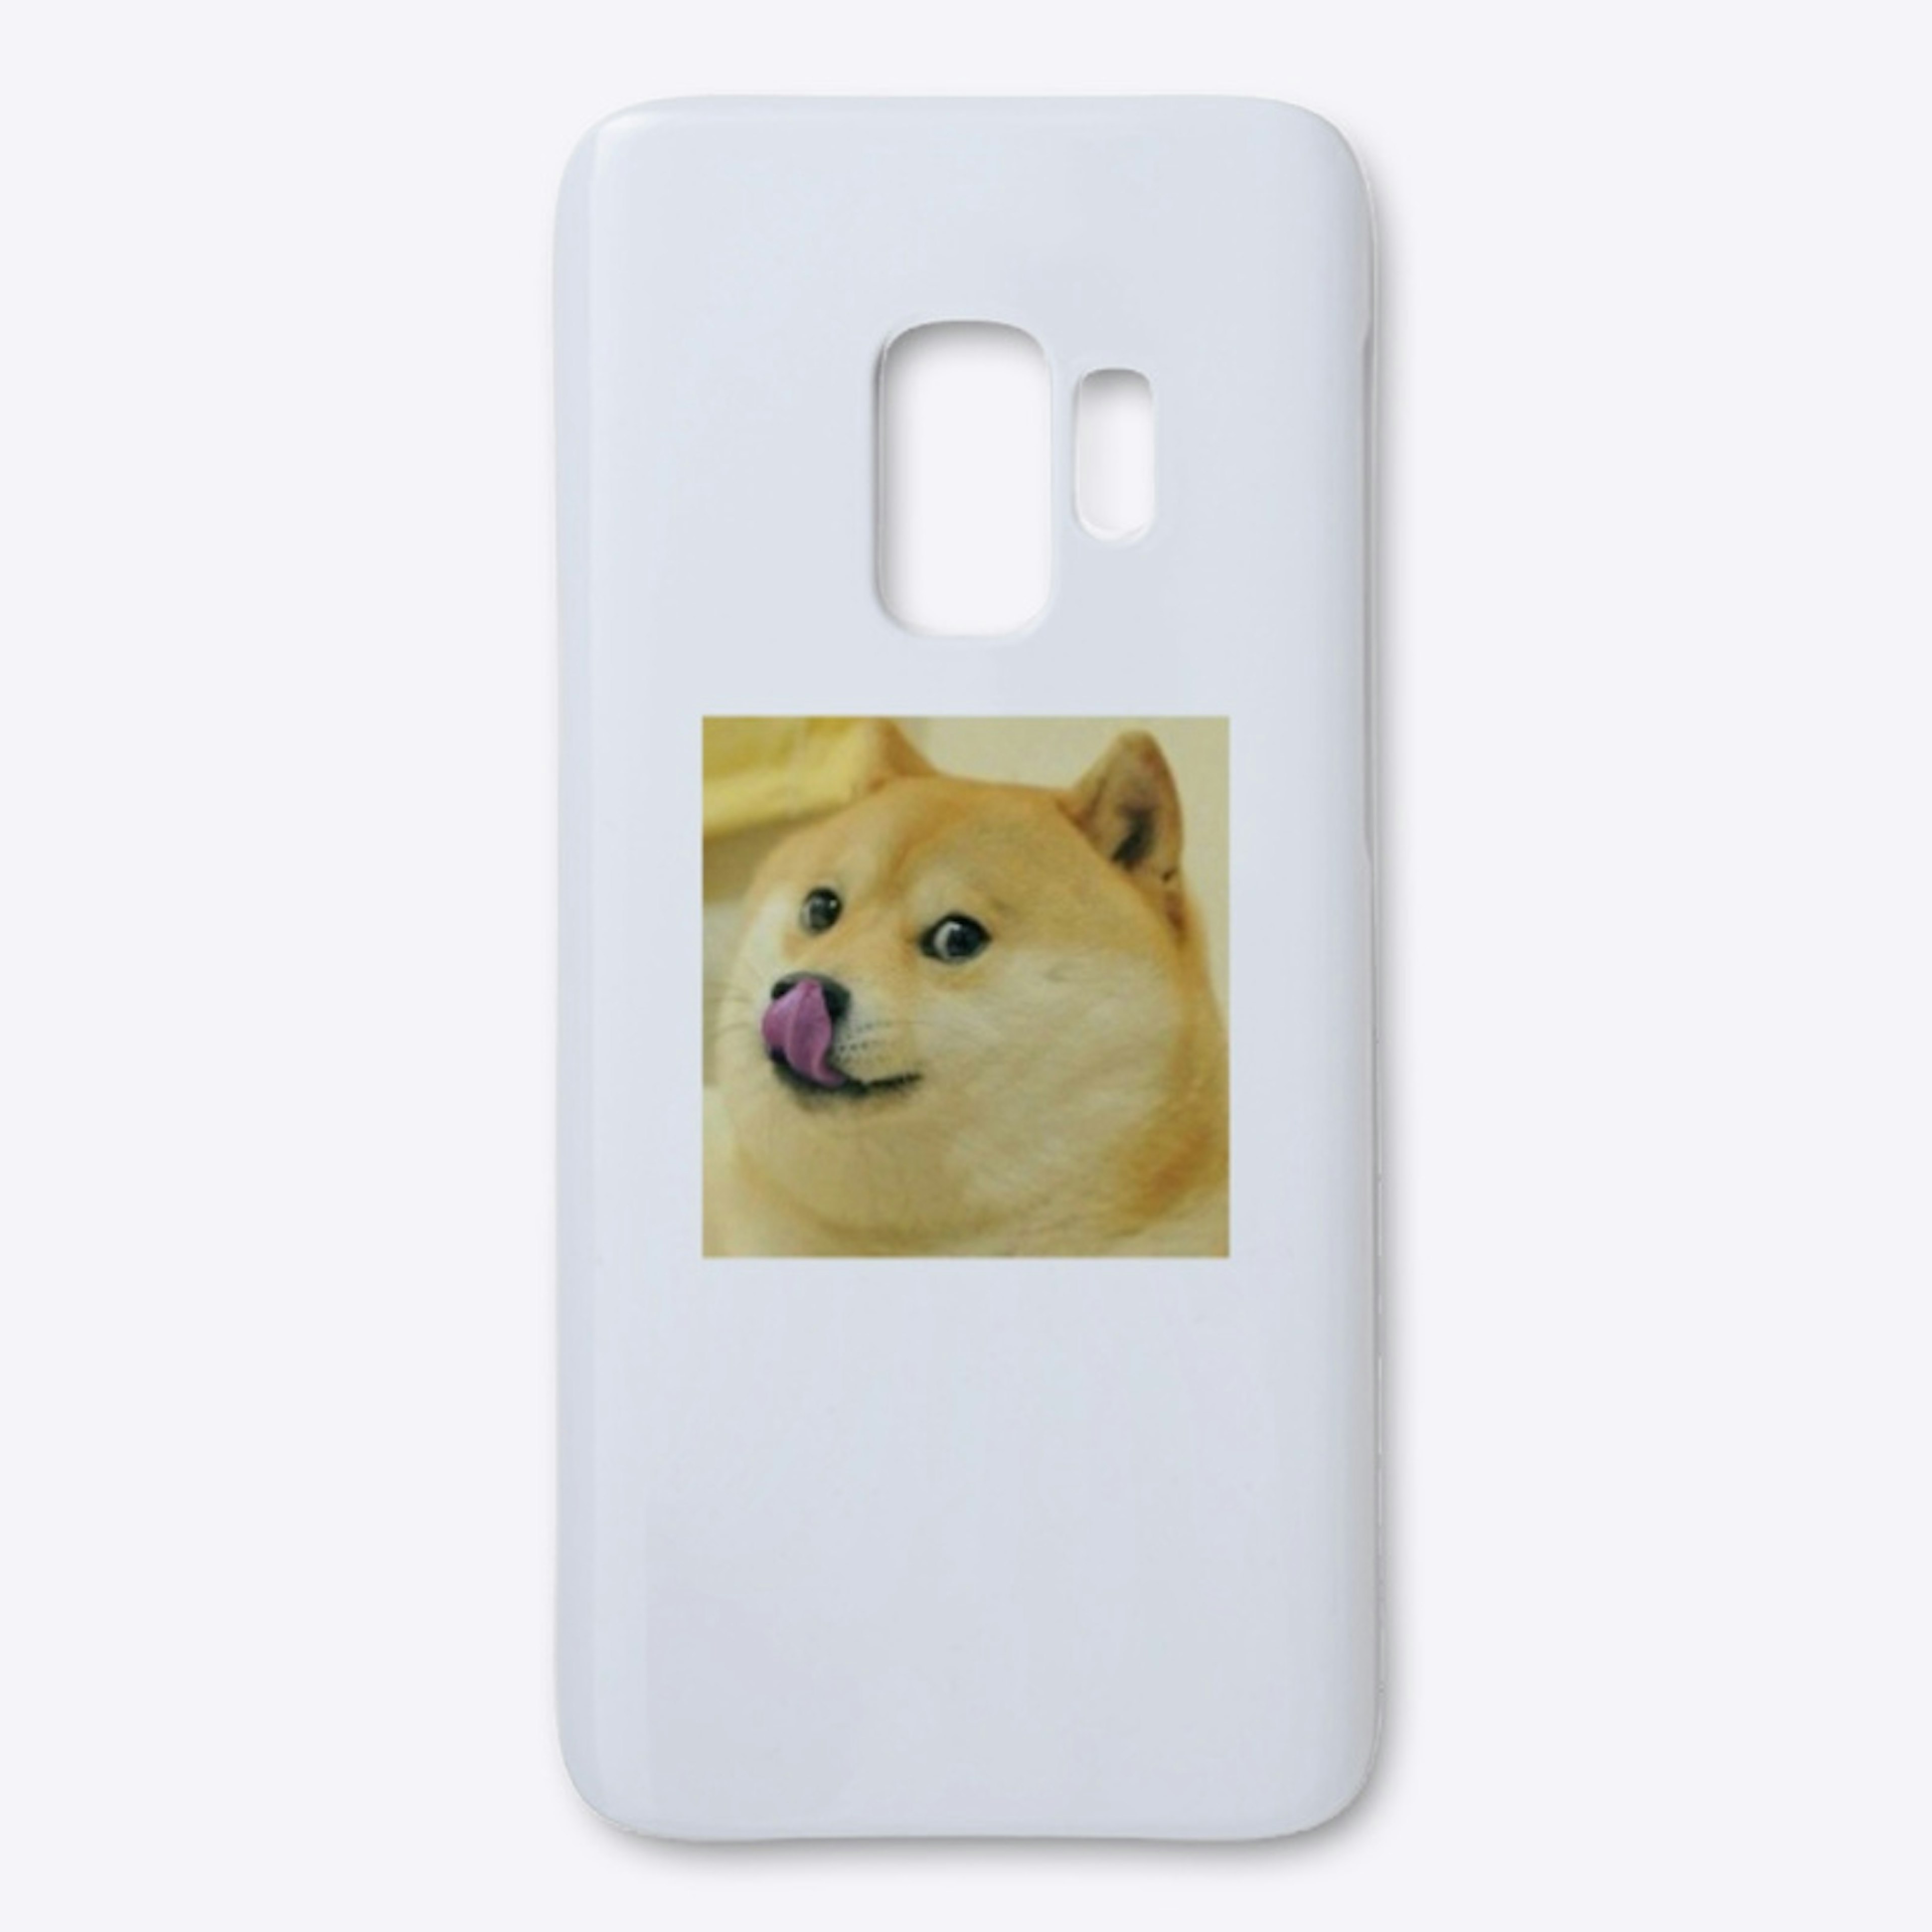 SIP DOGE COLLECTION